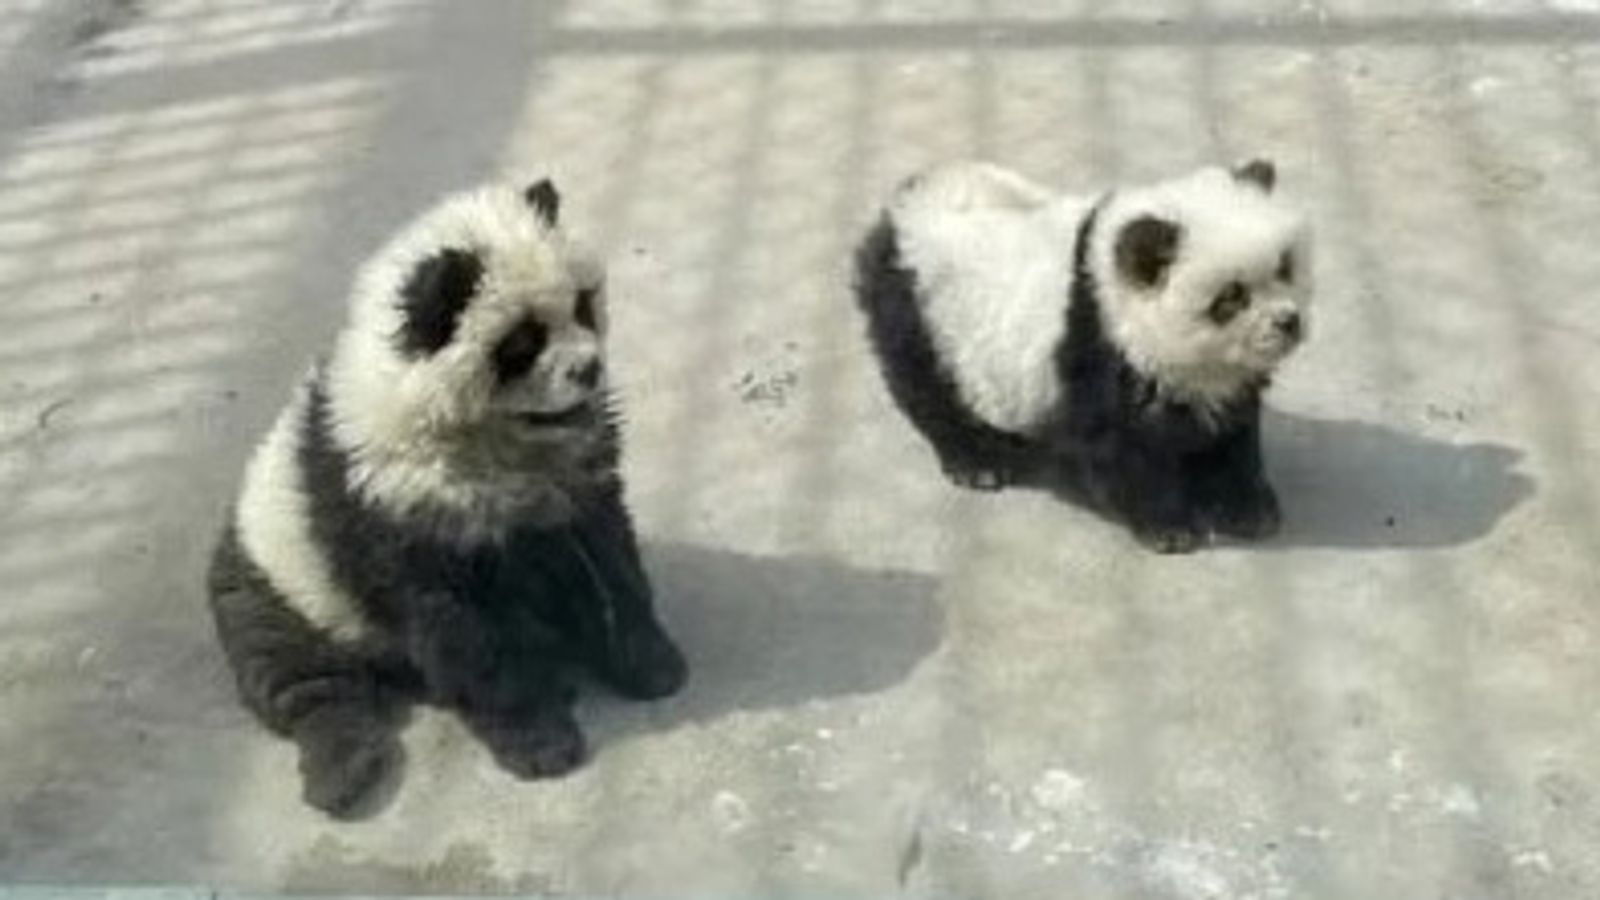 Chinese zoo under fire after dyeing dogs black and white for ‘panda’ exhibit